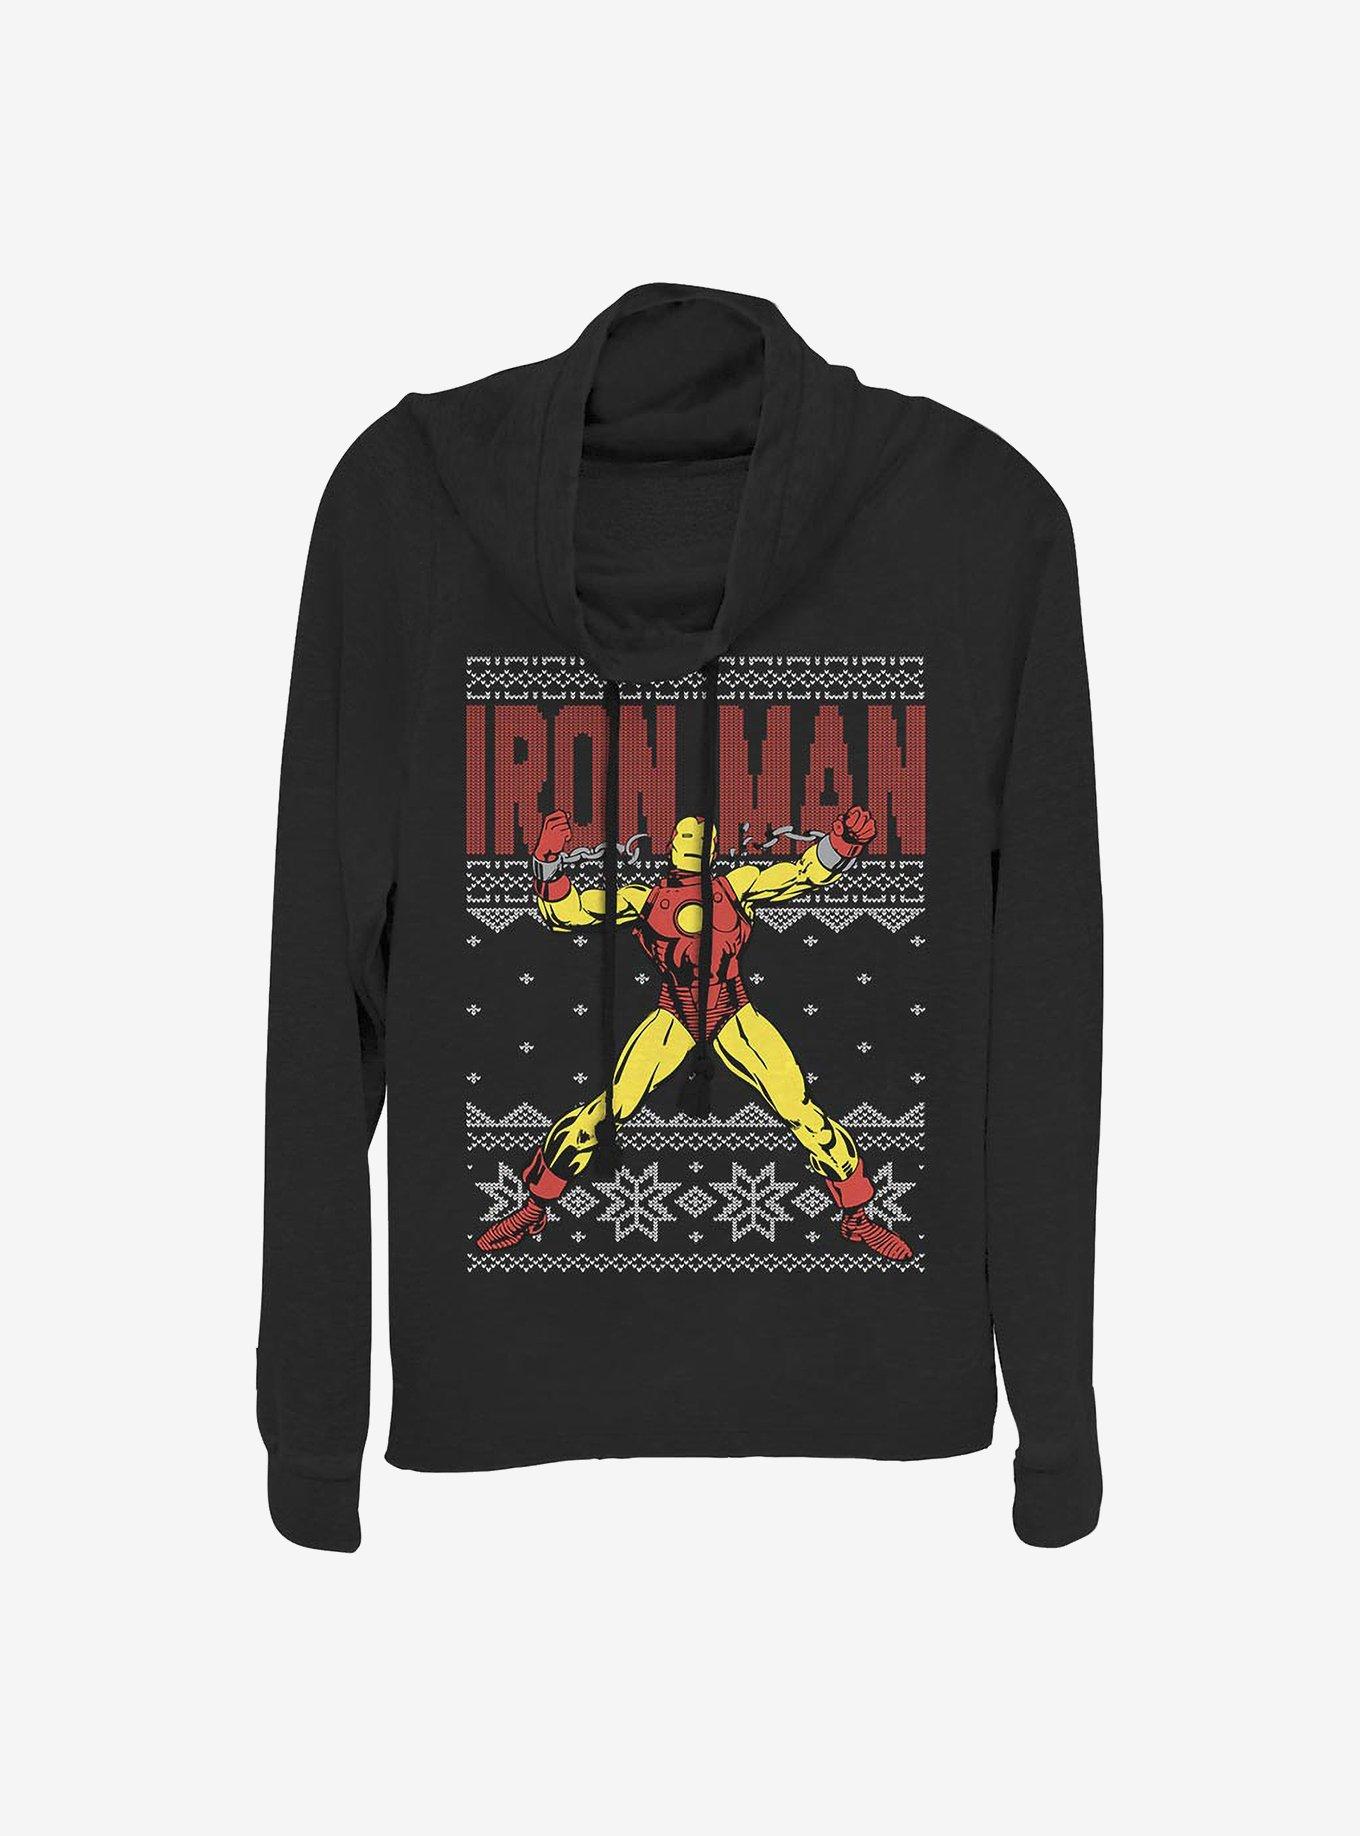 Marvel Iron Man Ugly Christmas Sweater Cowl Neck Long-Sleeve Girls Top, BLACK, hi-res